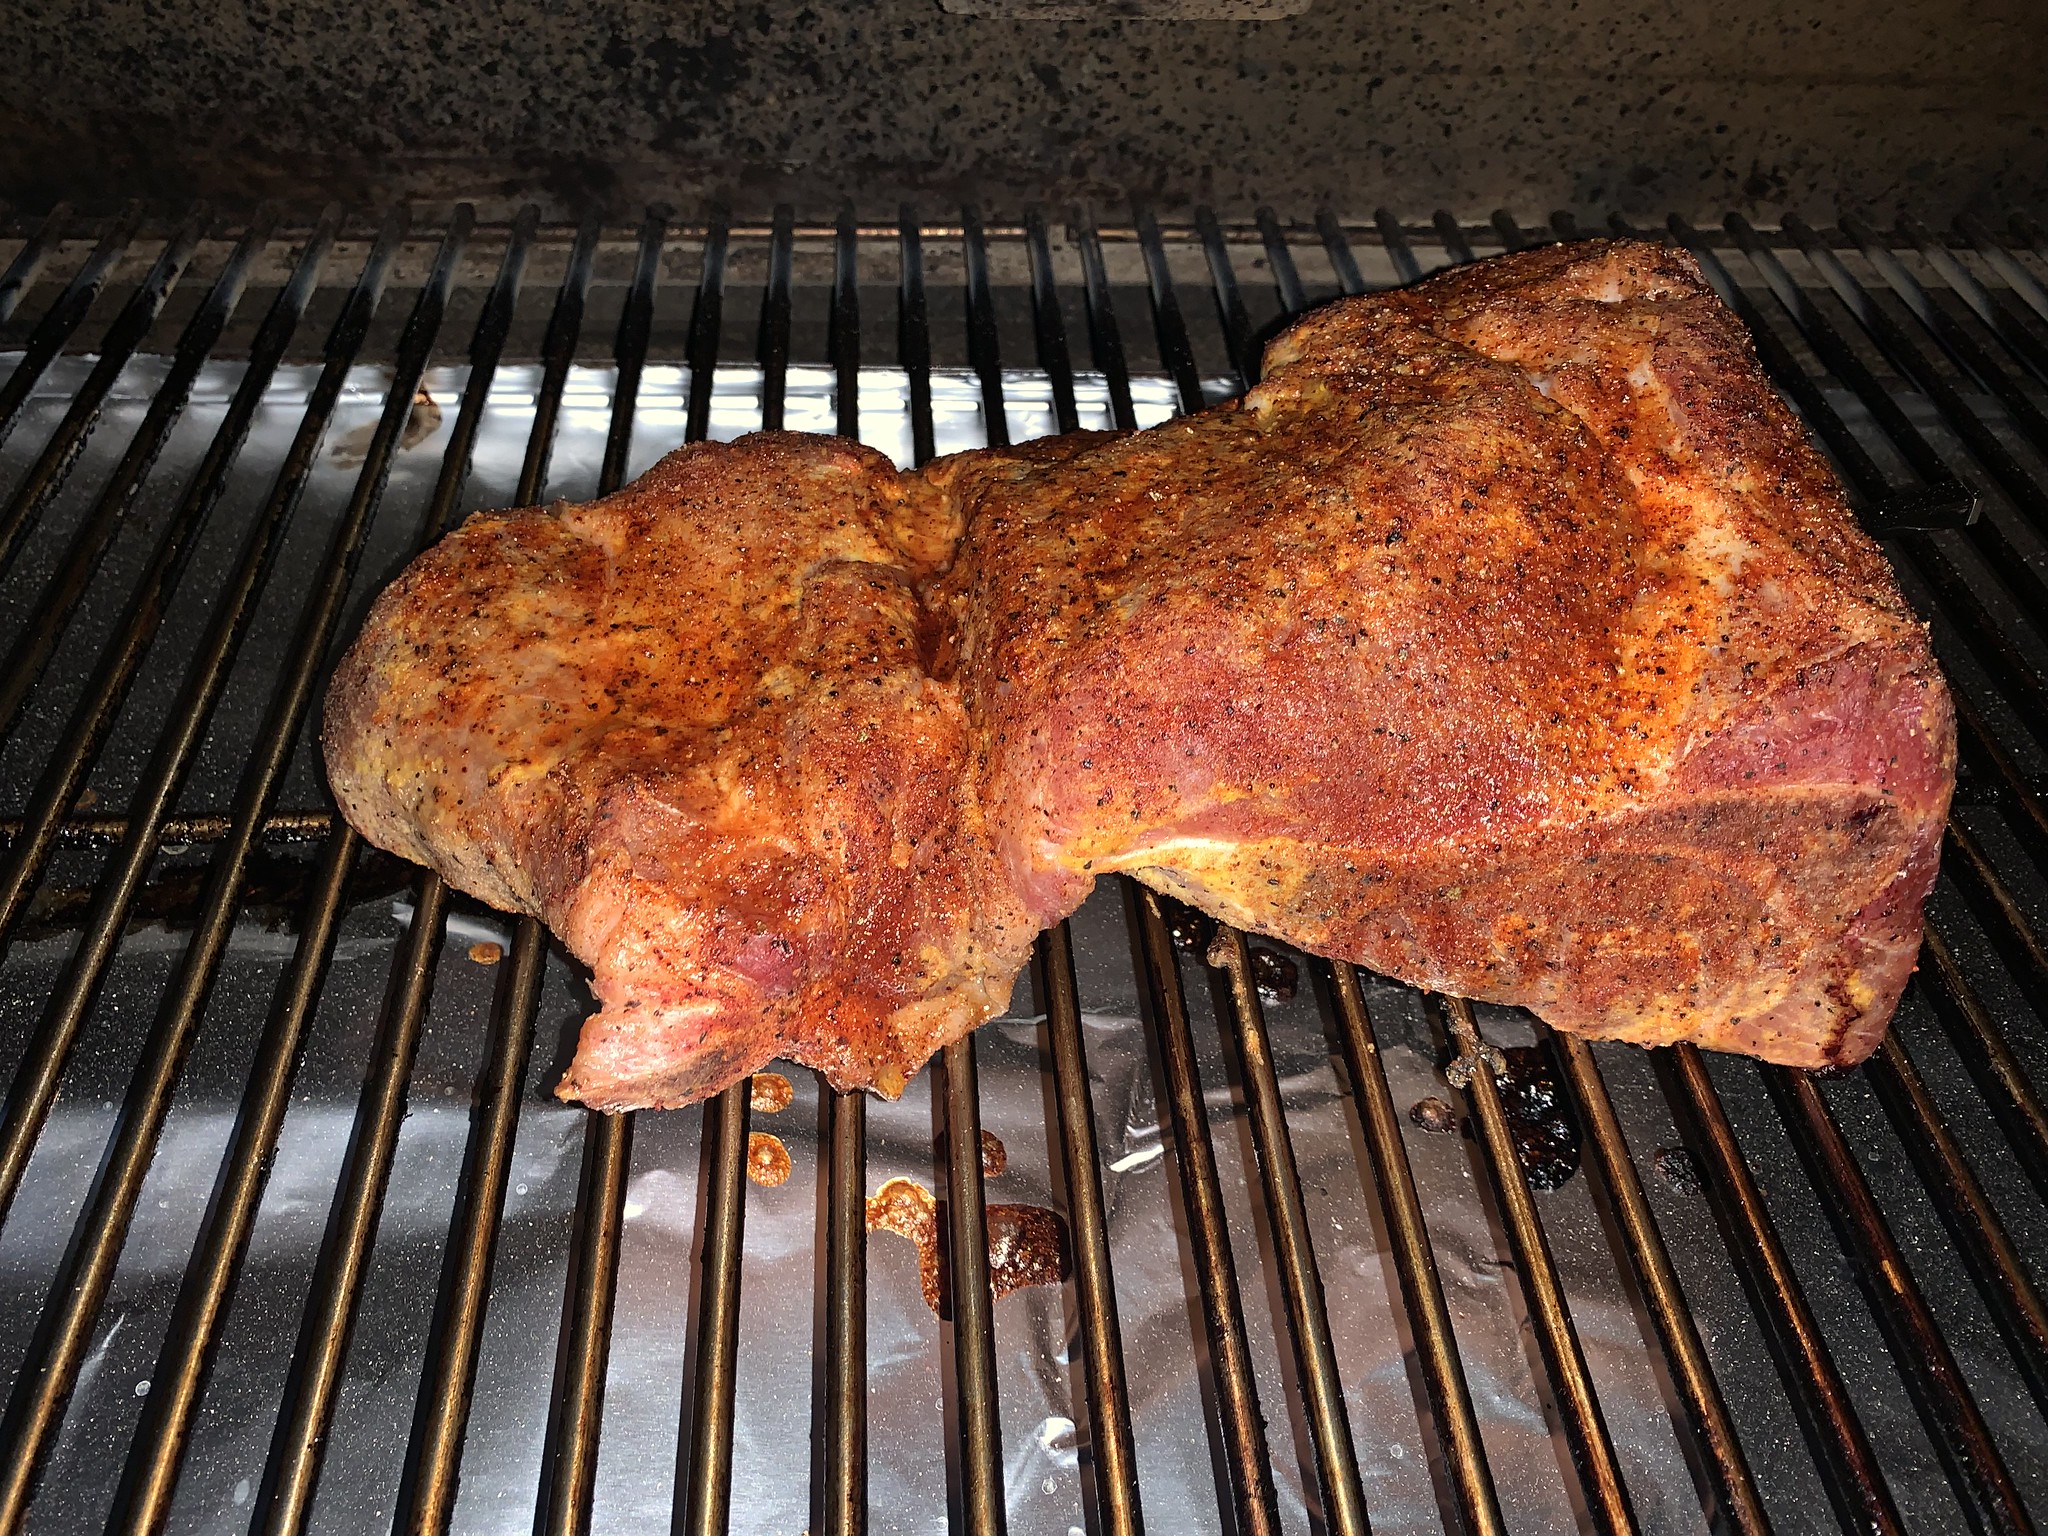 How long to smoke pork shoulder at 250 on the charcoal grill?